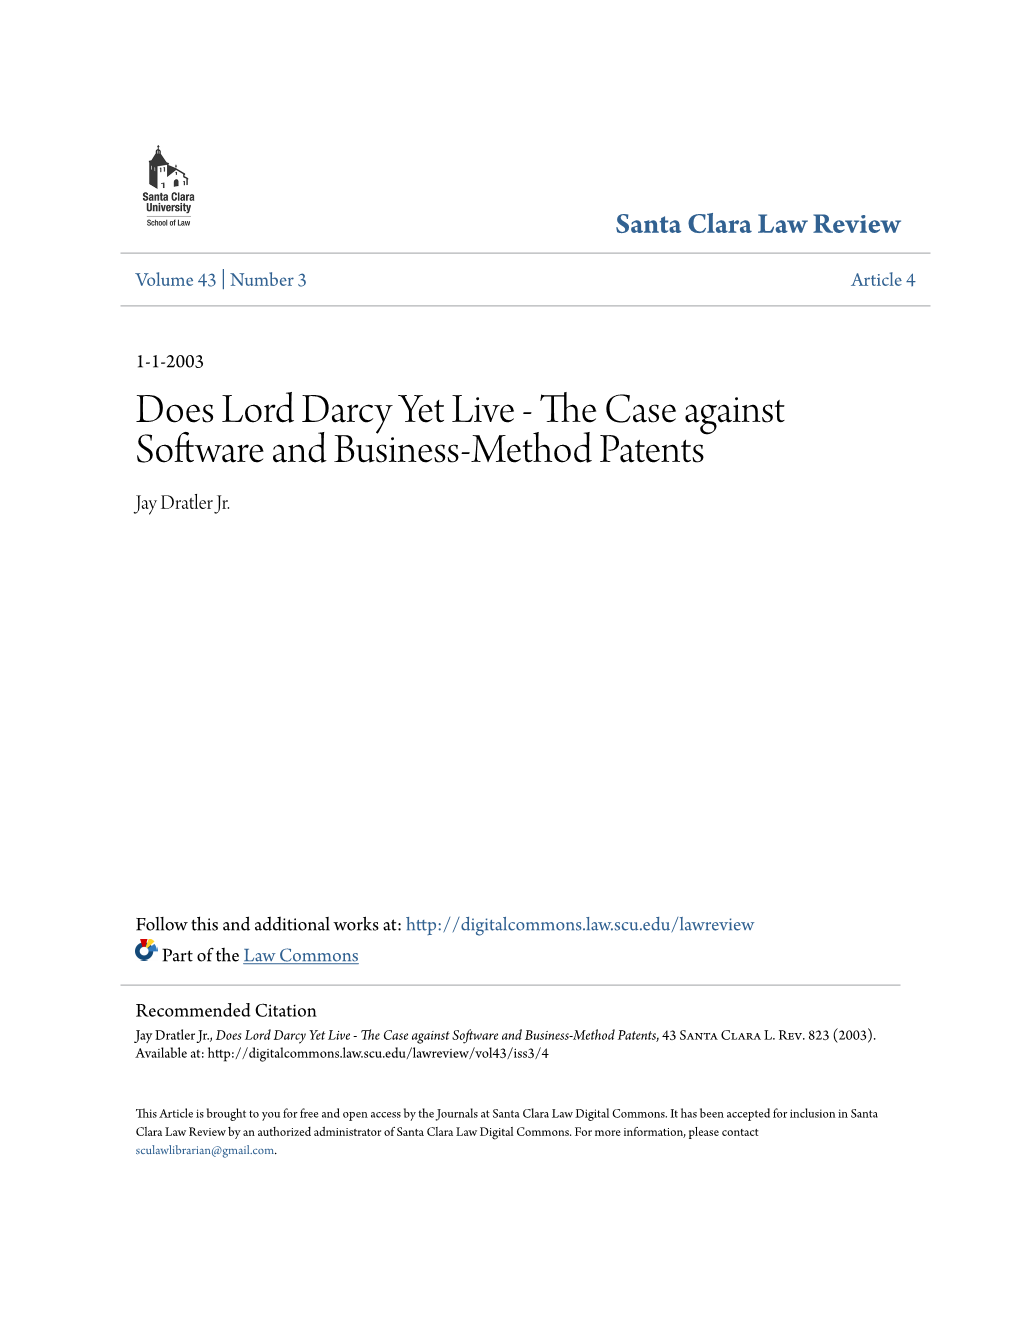 Does Lord Darcy Yet Live - the Ac Se Against Software and Business-Method Patents Jay Dratler Jr